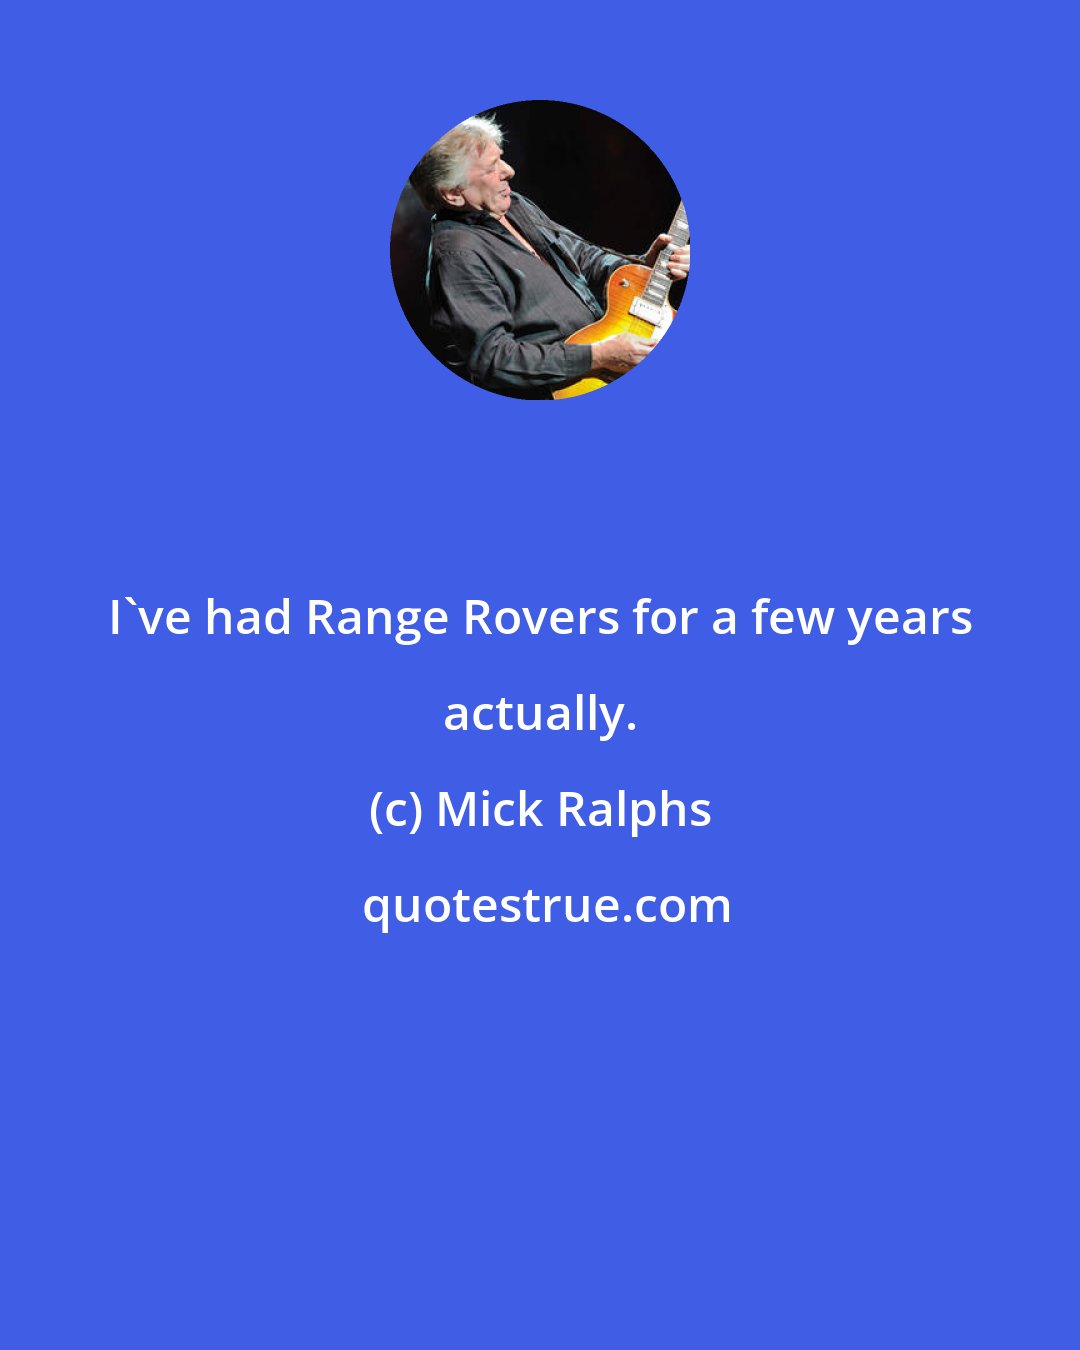 Mick Ralphs: I've had Range Rovers for a few years actually.